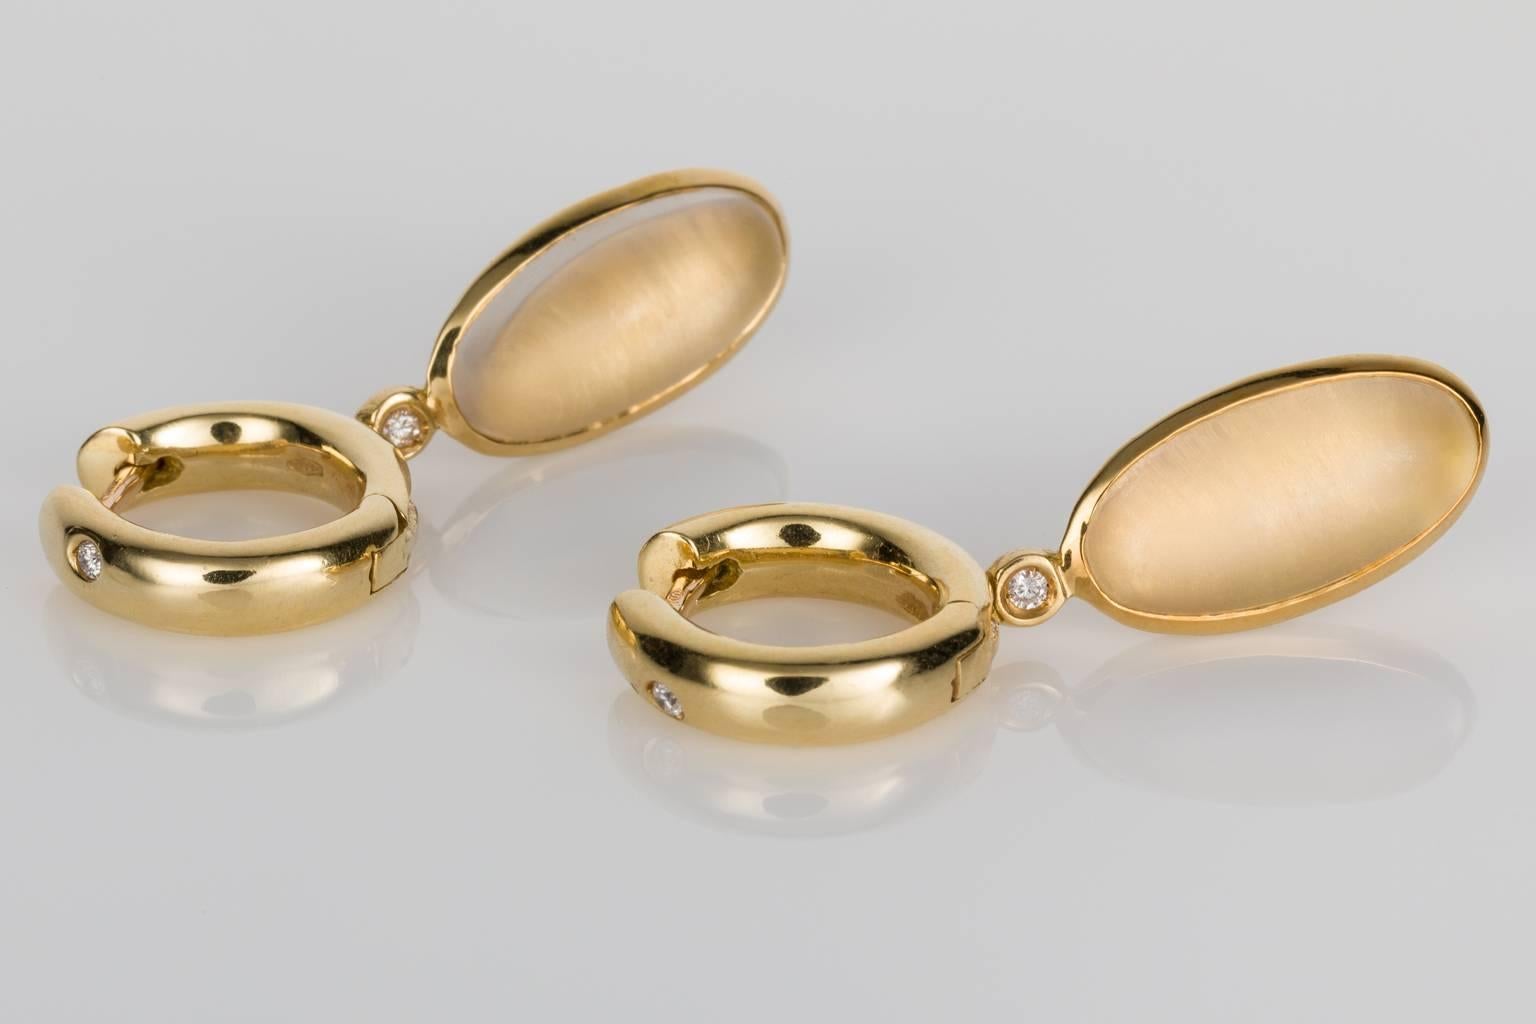 Such a delightful pair of earrings that would suit any occasion. H Stern the Brazilian jewellery designer who is synonymous with classic style and elegance. This pair of earrings has an oval shaped cabochon quartz crystal layered over 18k yellow